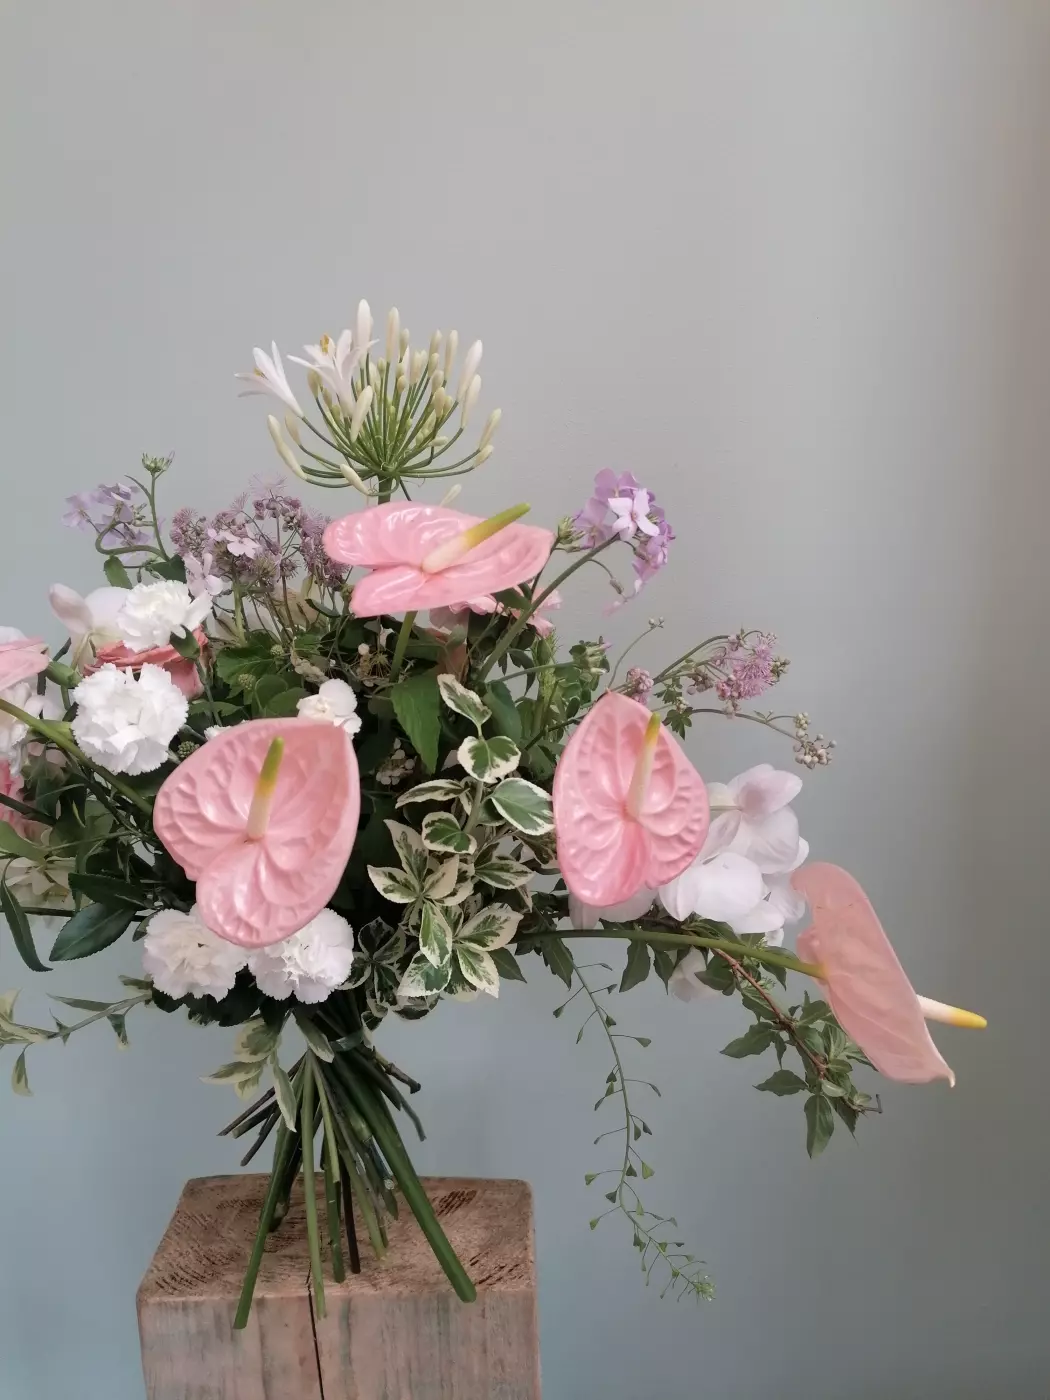 This is an original, surprising form of bouquet. The flowers are arranged horizontally, which gives a new arrangement possibility, allowing the bouquet to be presented from 2 sides.